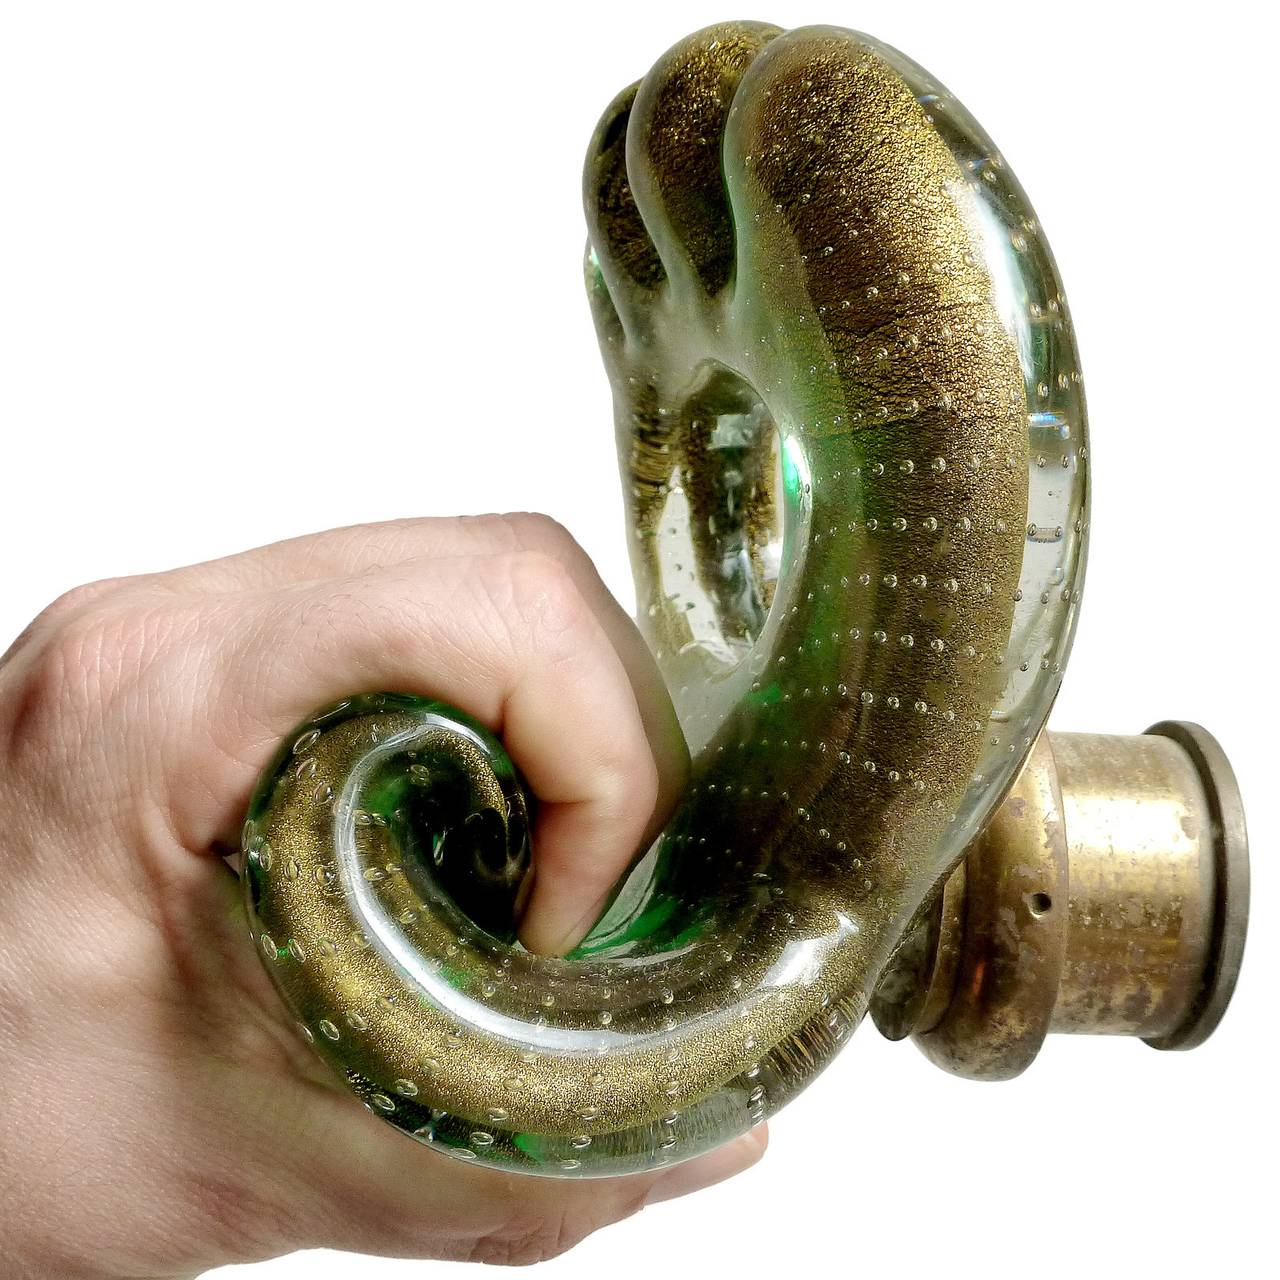 FREE Shipping Worldwide! See details below description.

Rare Antique Murano Hand Blown Green, Gold Flecks and Controlled Bubbles Art Glass Ornate Door Handle with Original Label. Attributed to designer Flavio Poli for Seguso Vetri D' Arte. It has